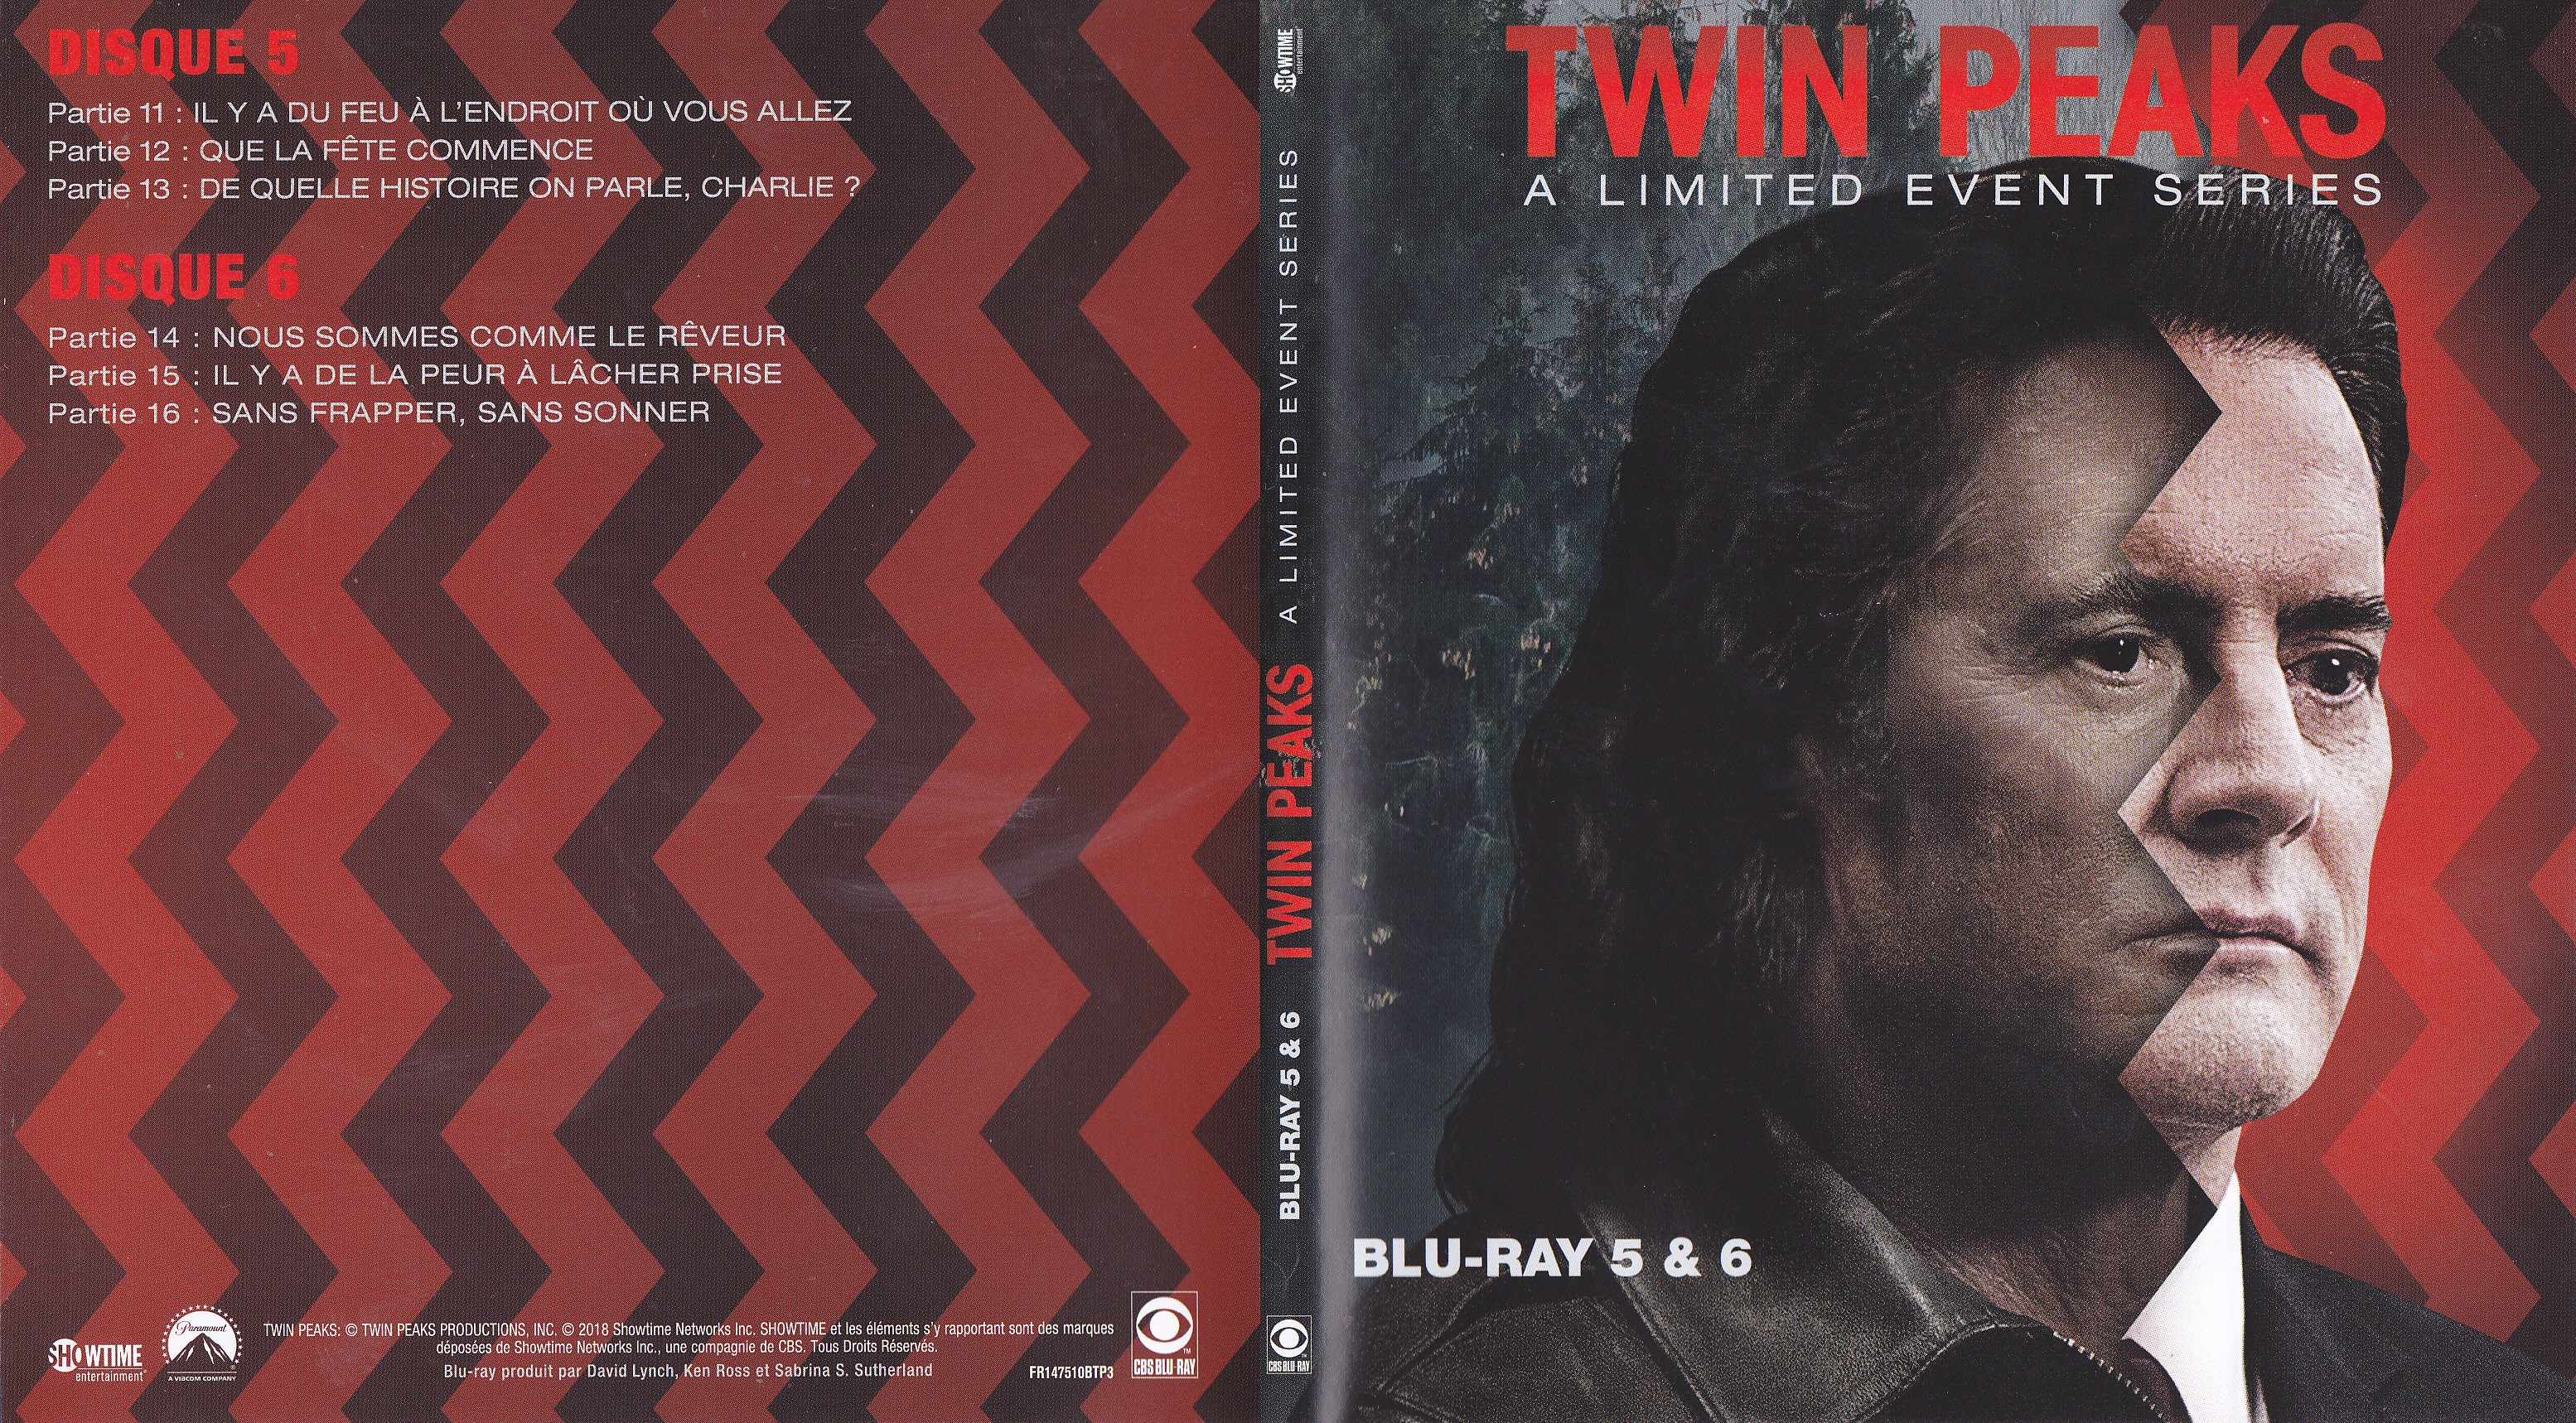 Jaquette DVD Twin Peaks A limited event series (BLU-RAY) v3